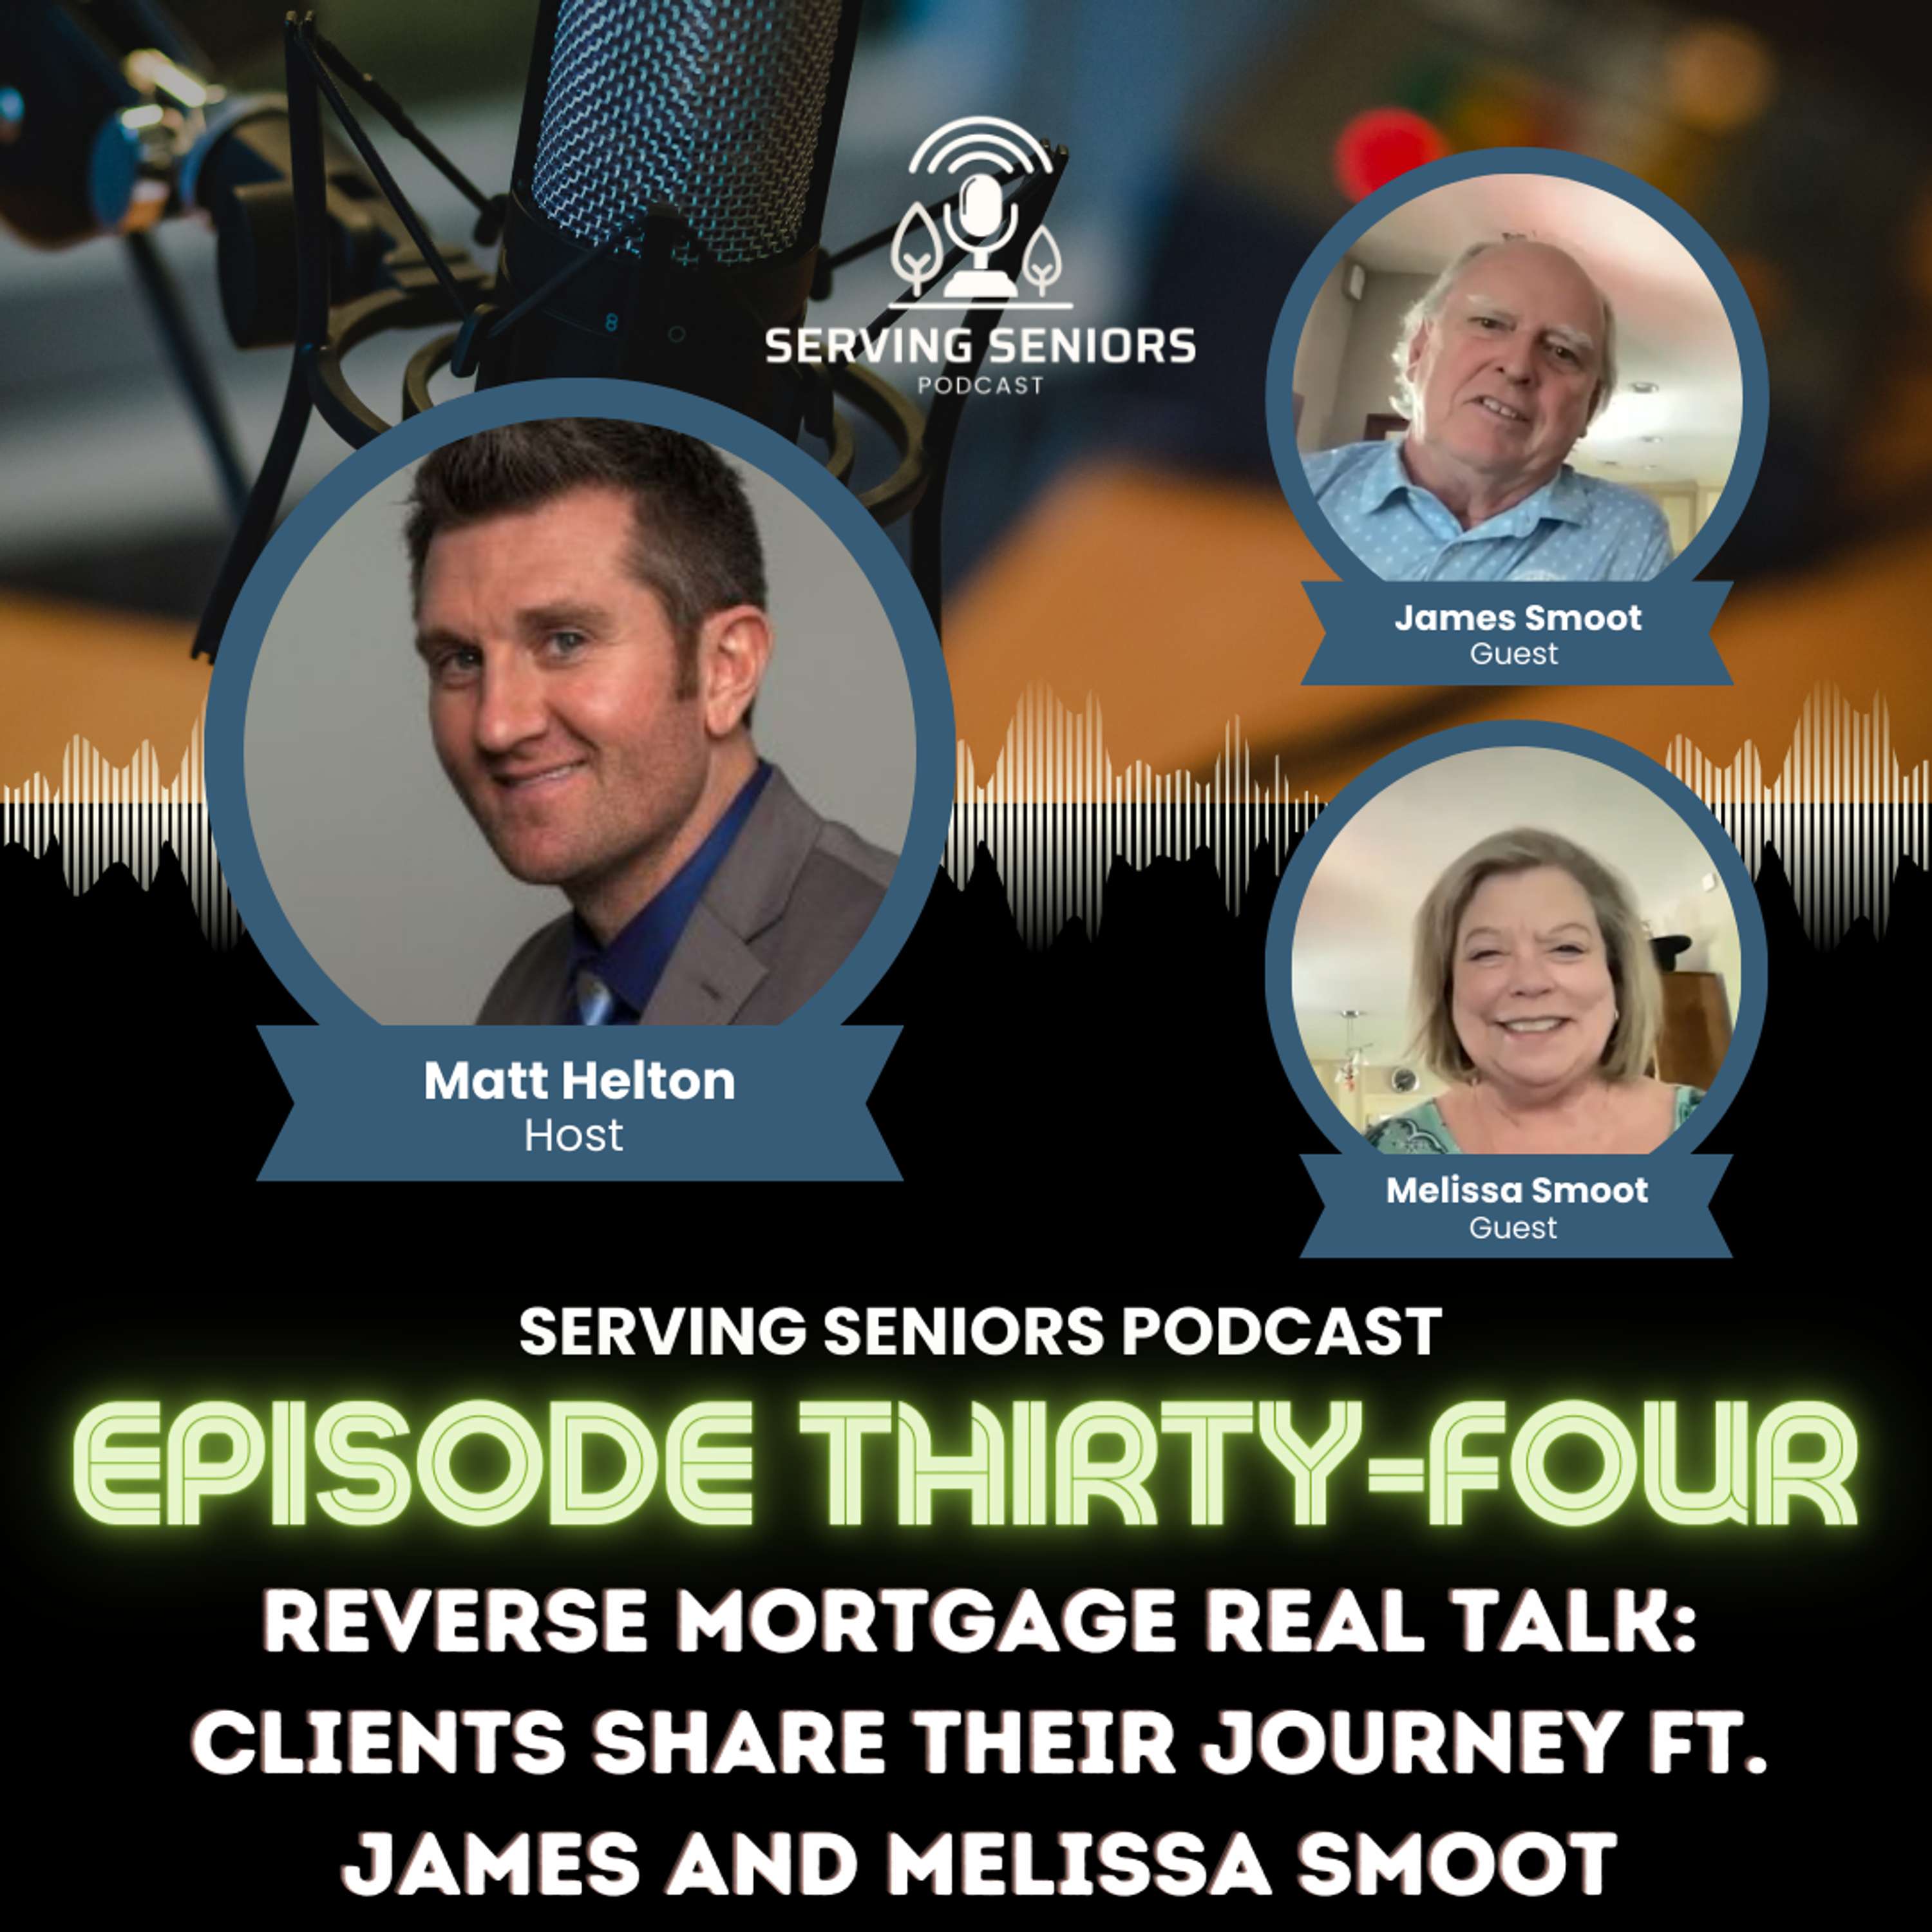 Episode 34: Reverse Mortgage Real Talk: Clients Share Their Journey ft. James and Melissa Smoot